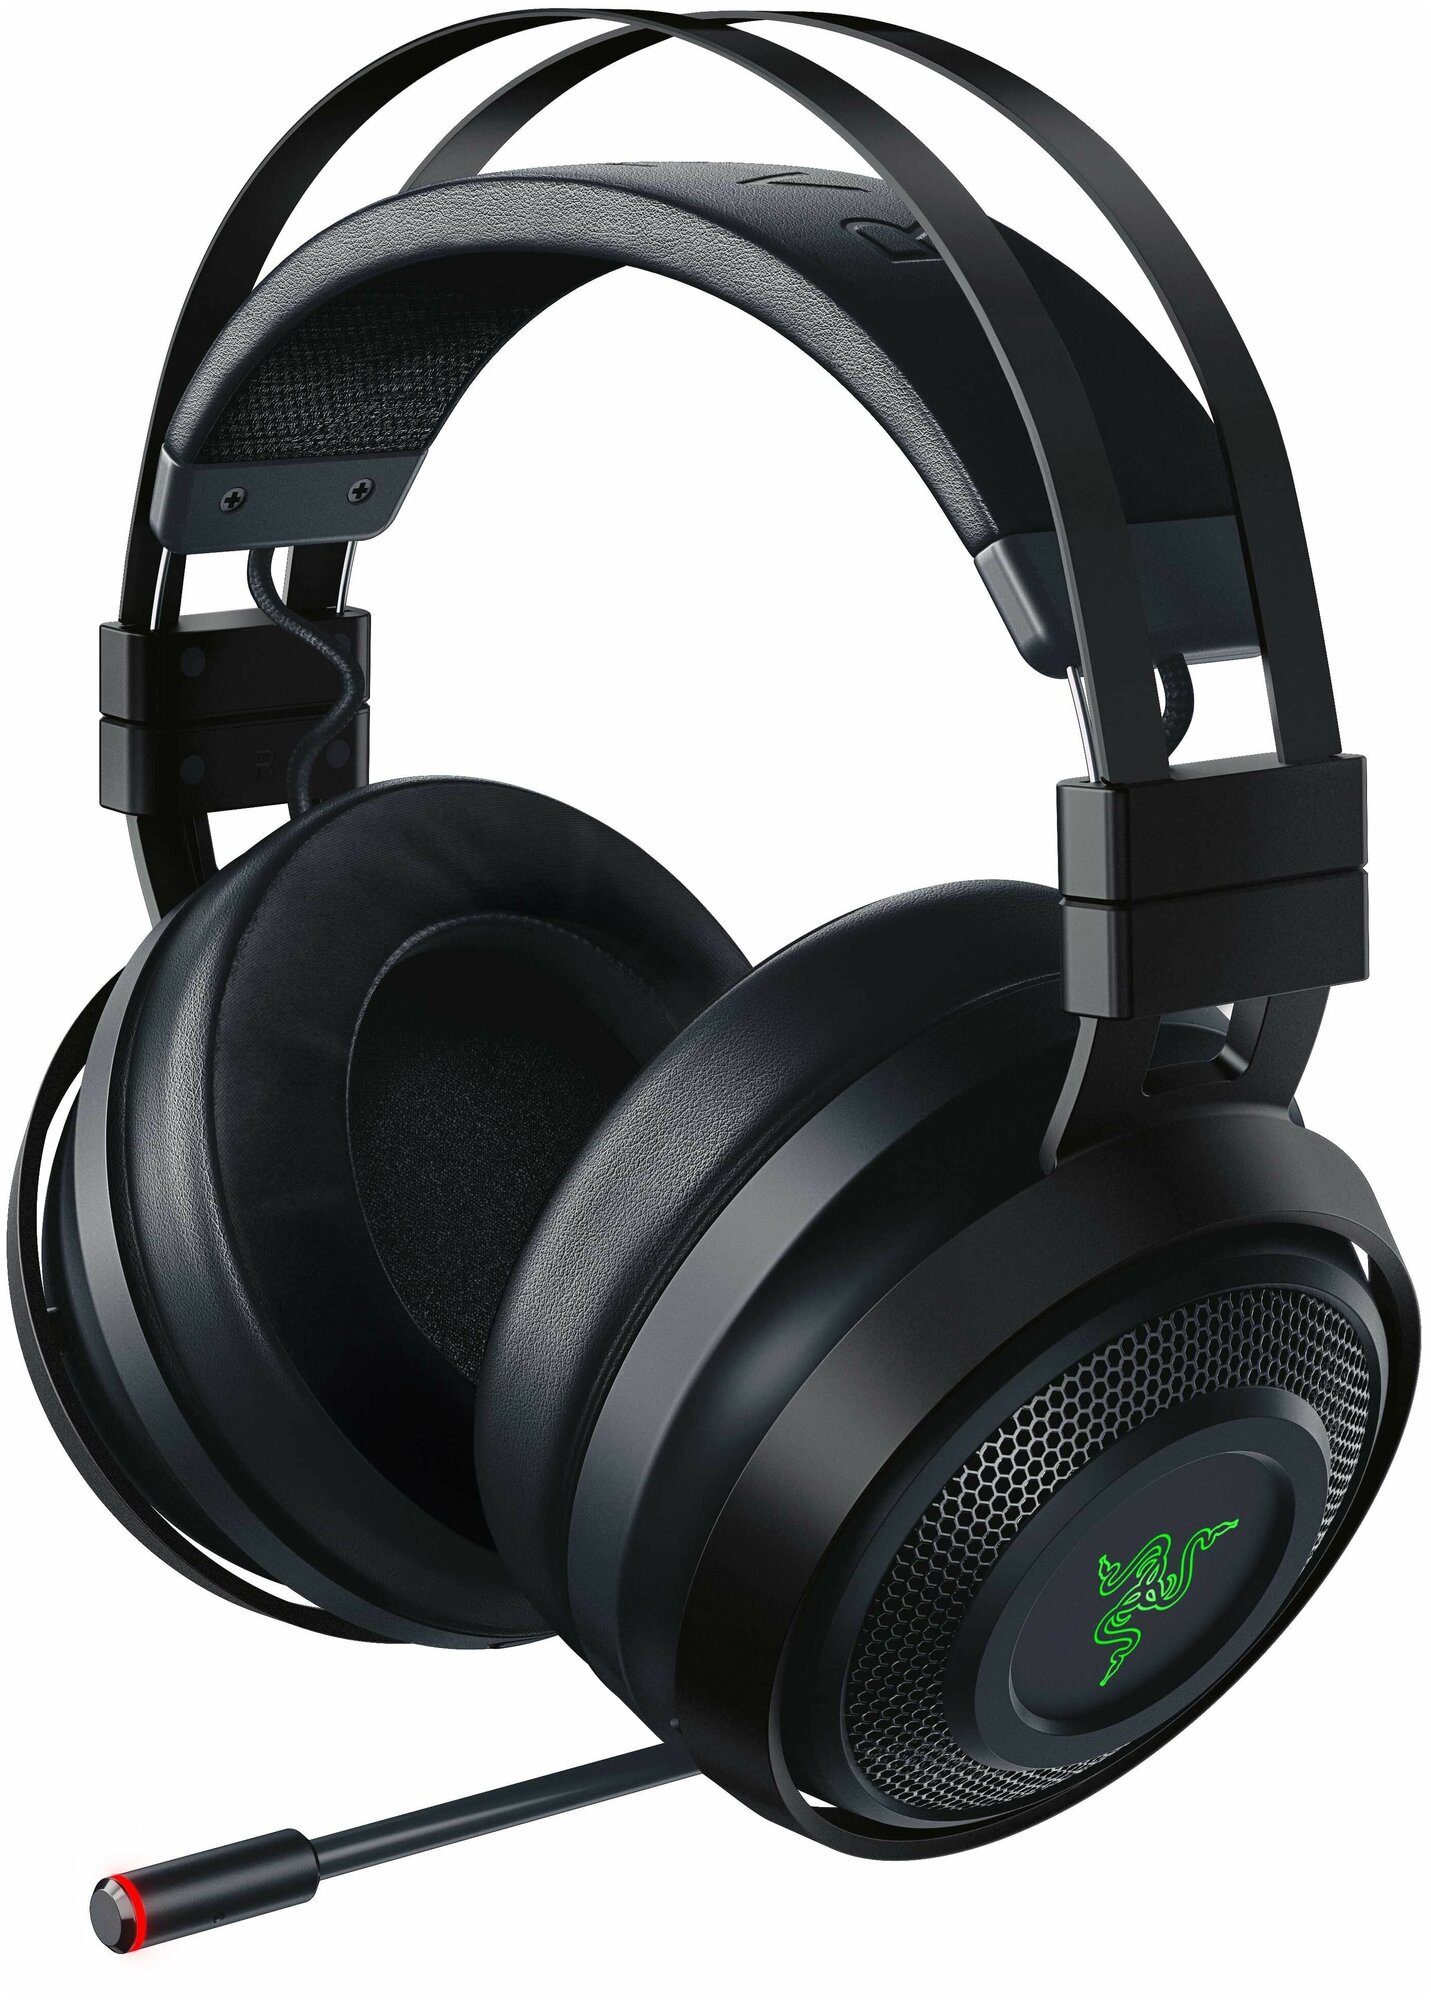 Razer Nari Ultimate - Wireless Gaming Headset with HyperSense Technology - FRML Packaging - фото №1